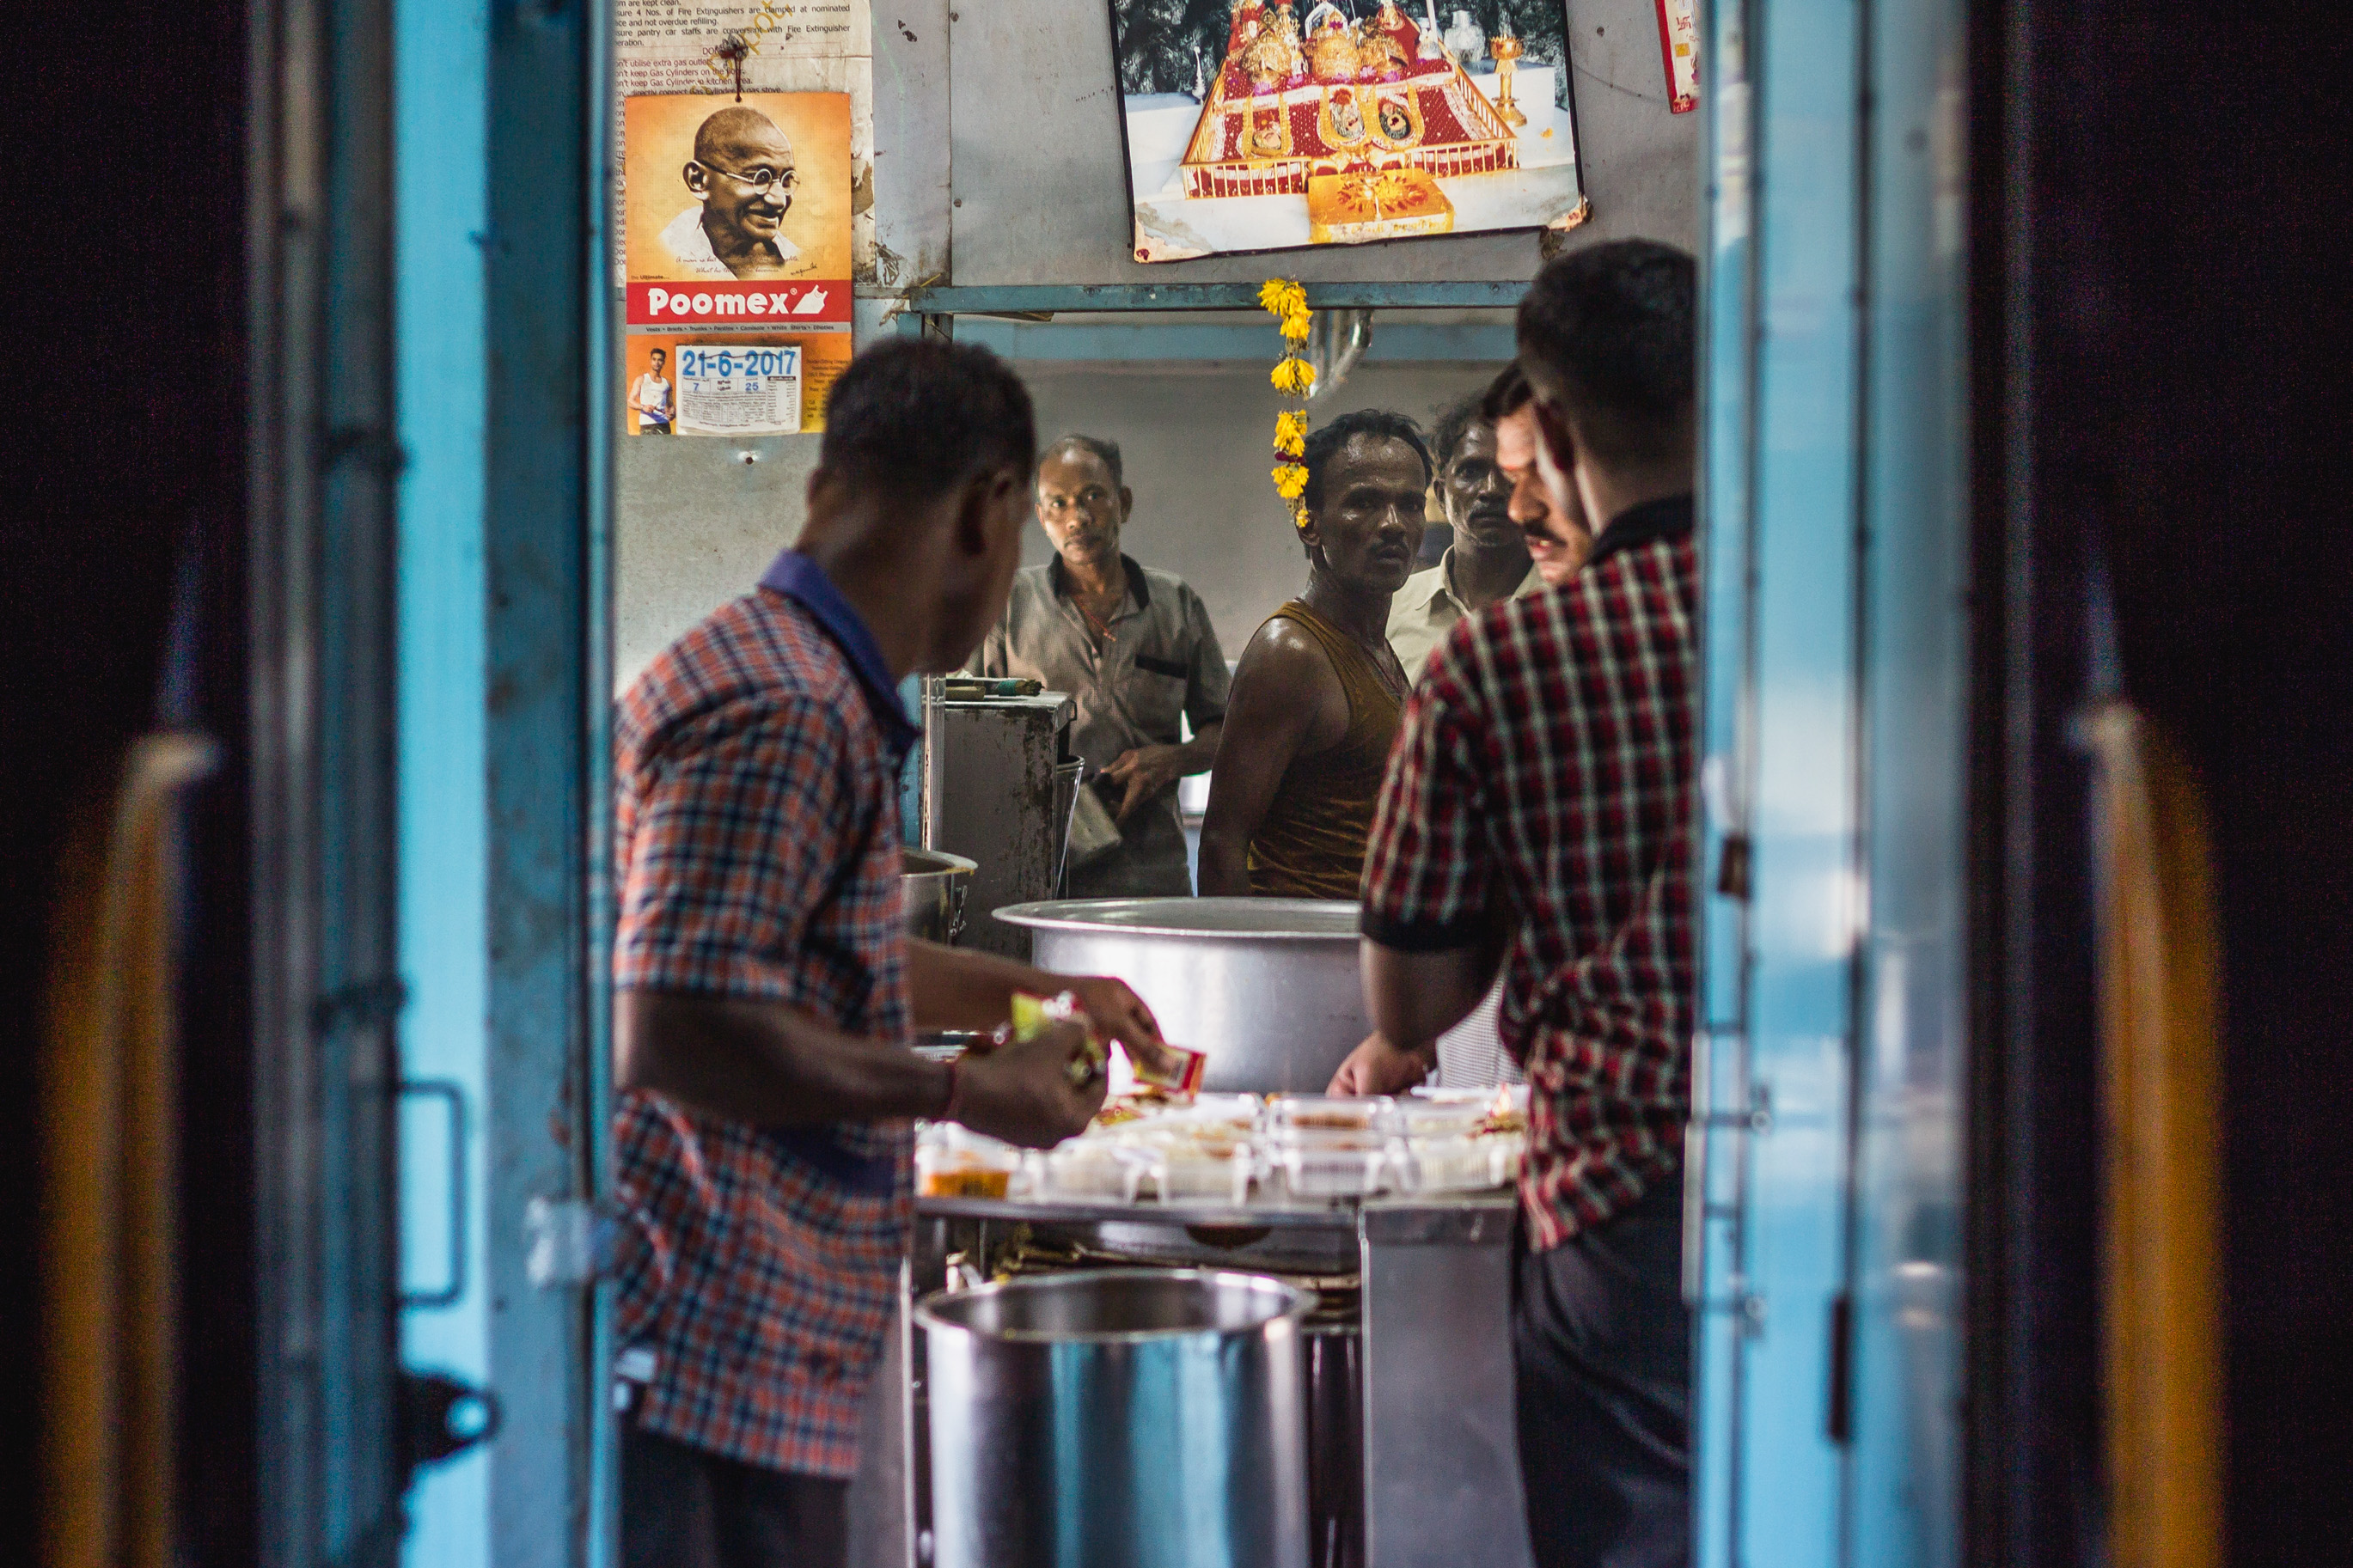 Usually, train rides take long hours up to a couple of days. In one of the carts, local chefs prepare the most delicious thali and samosas for all of the people on the train. They cook nonstop under the intent gaze of Gandhi. 